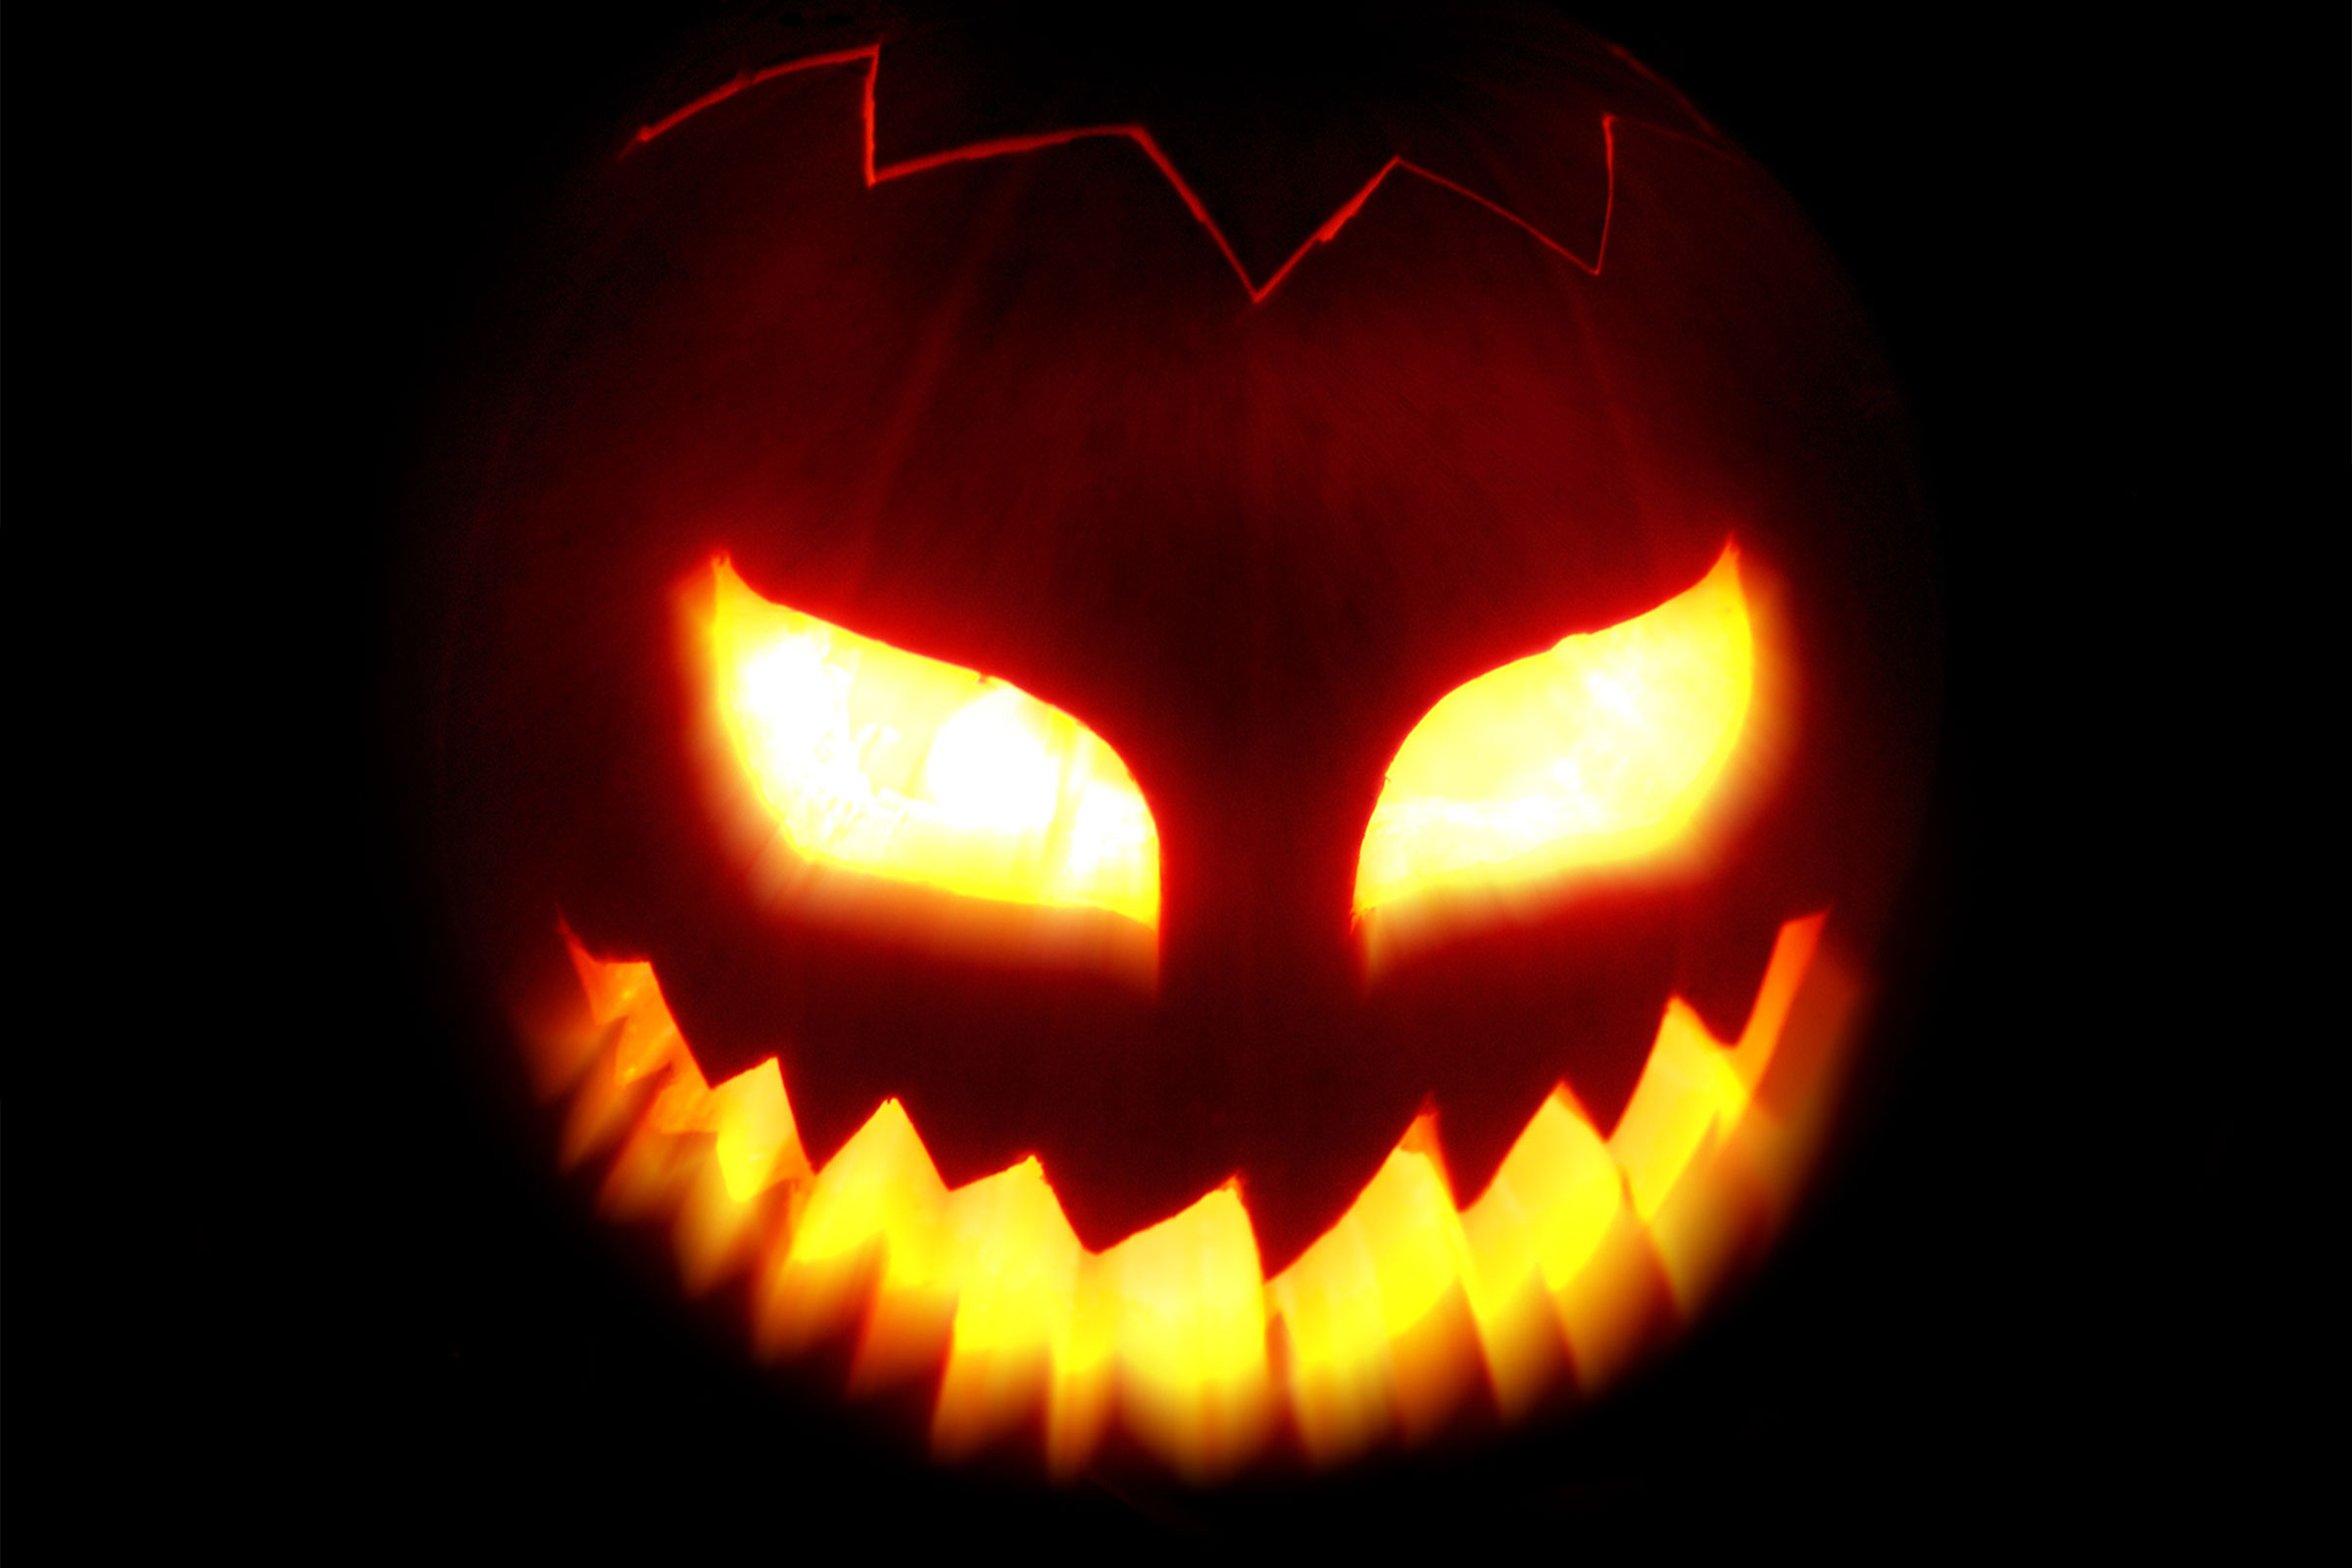 Scary Happy Halloween 2015 Images Backgrounds Wallpapers Ideas